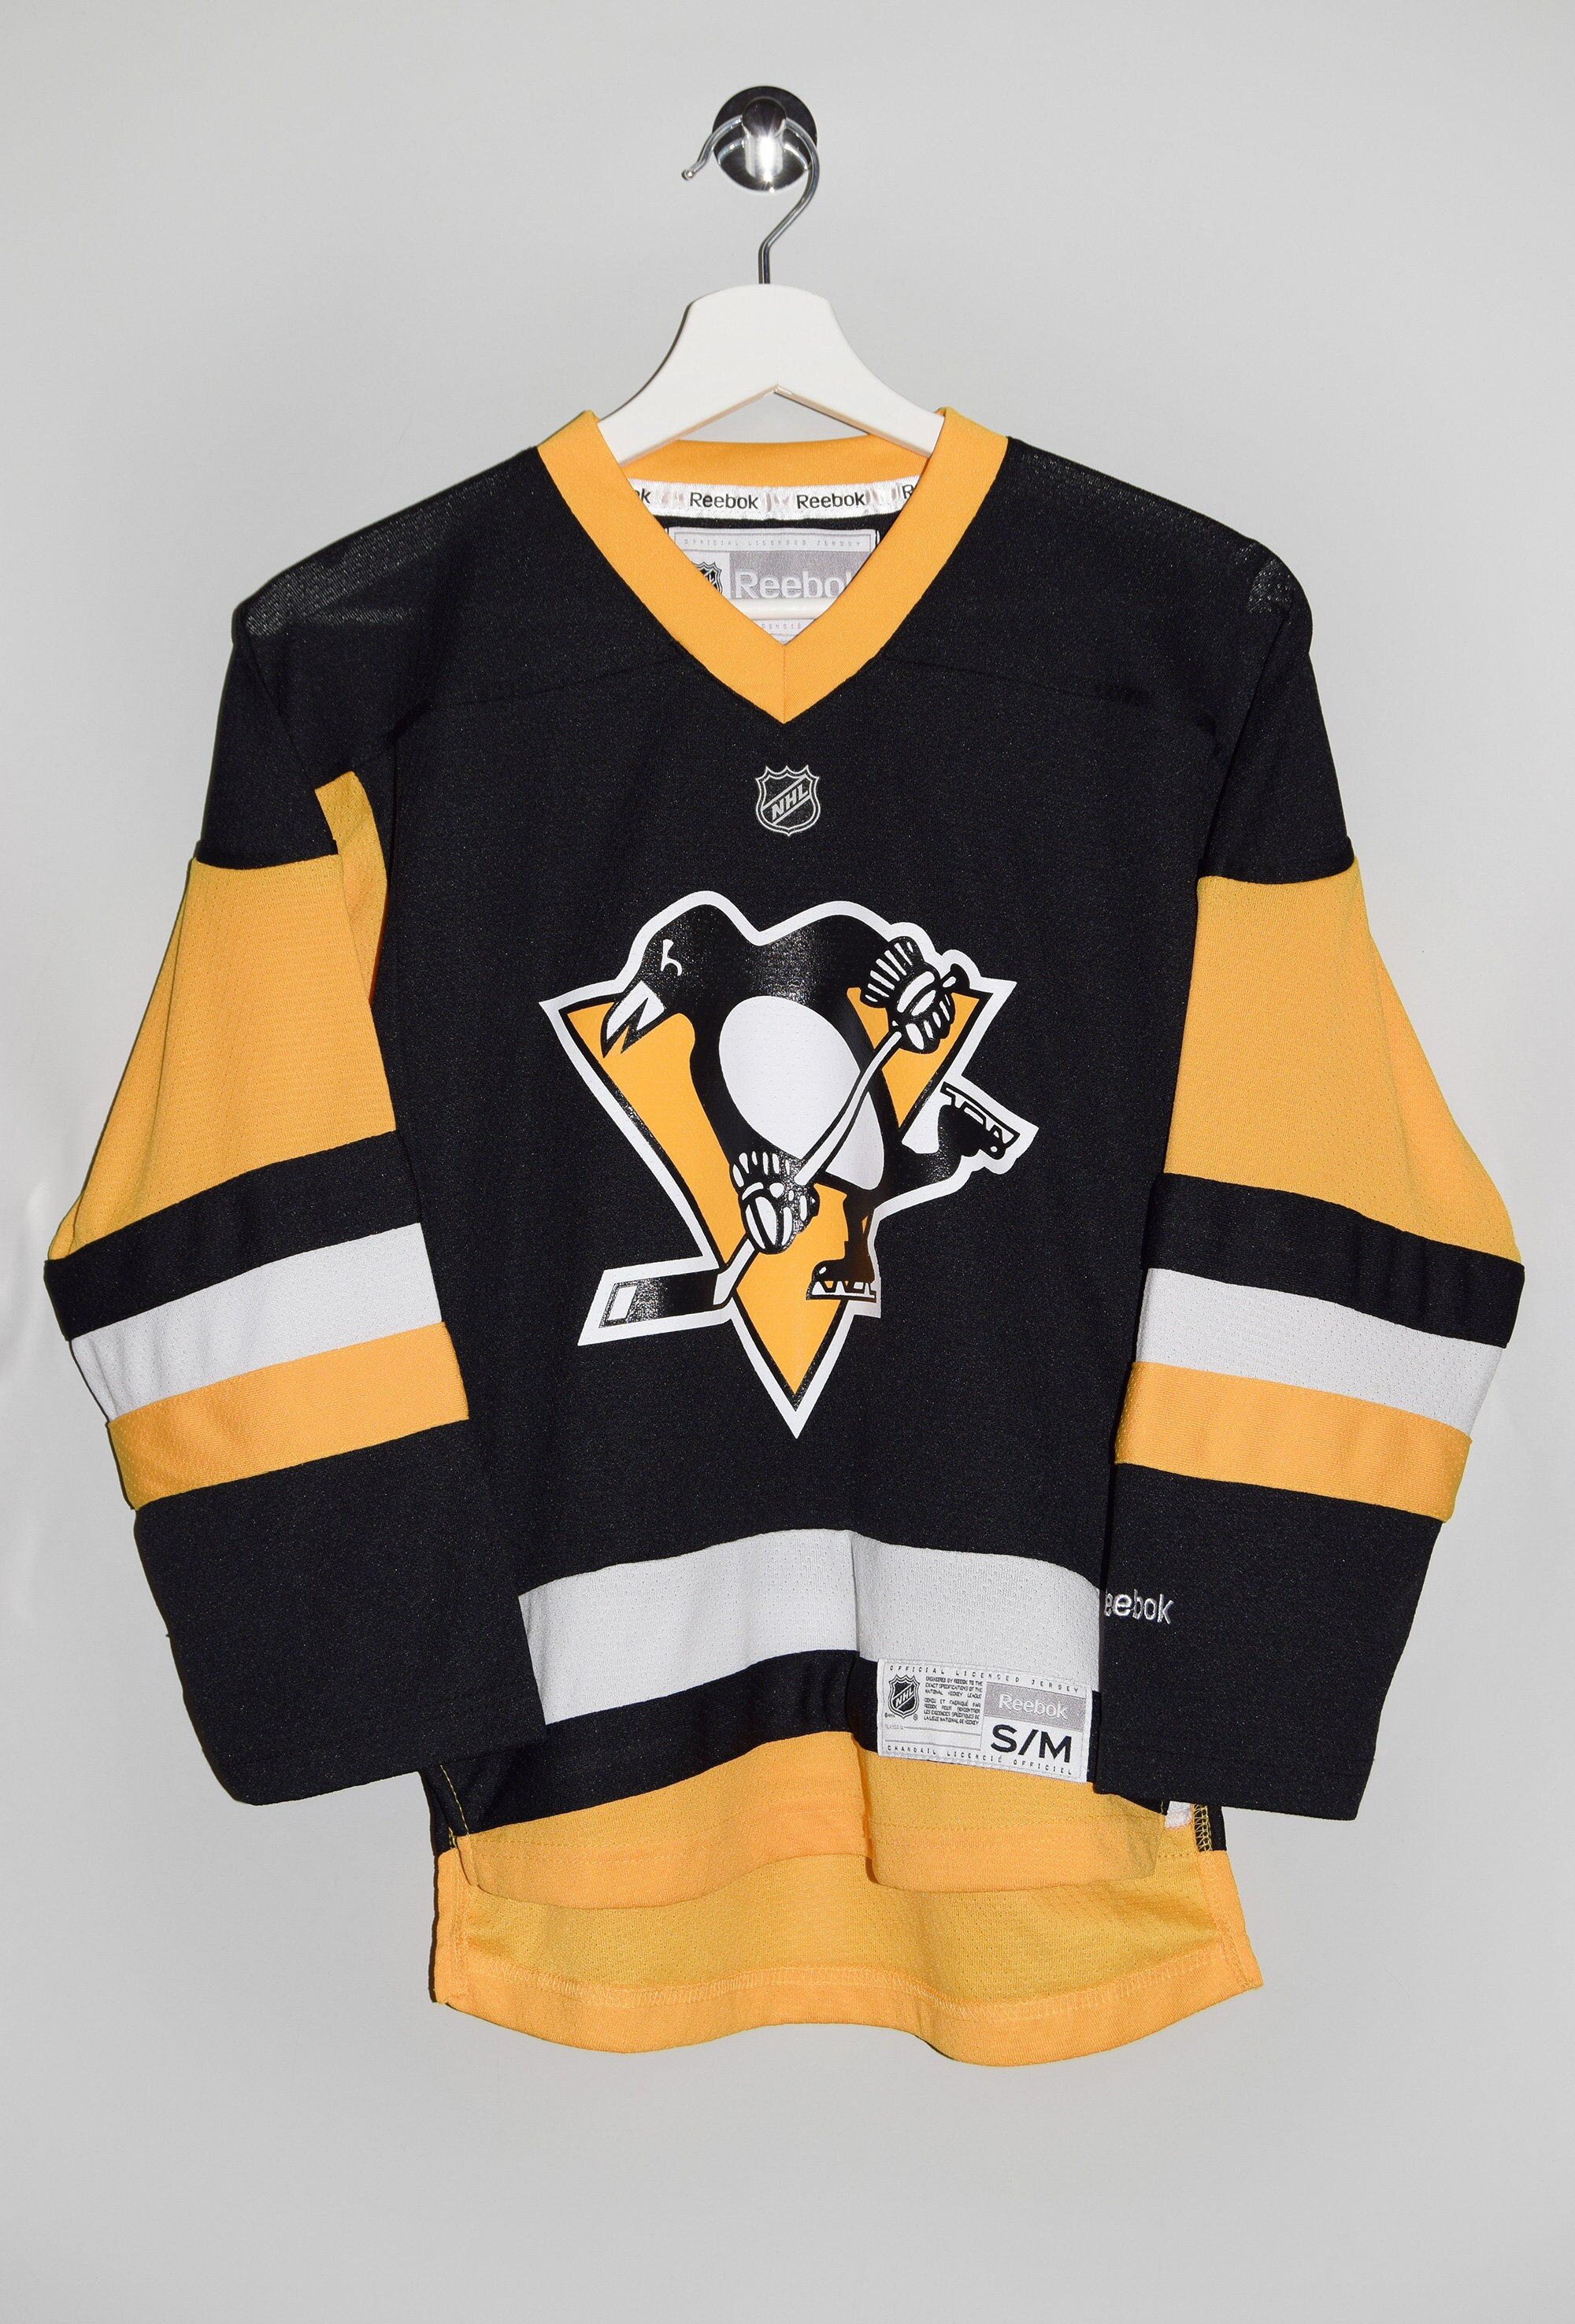 NHL Jerseys for sale in Christchurch, New Zealand